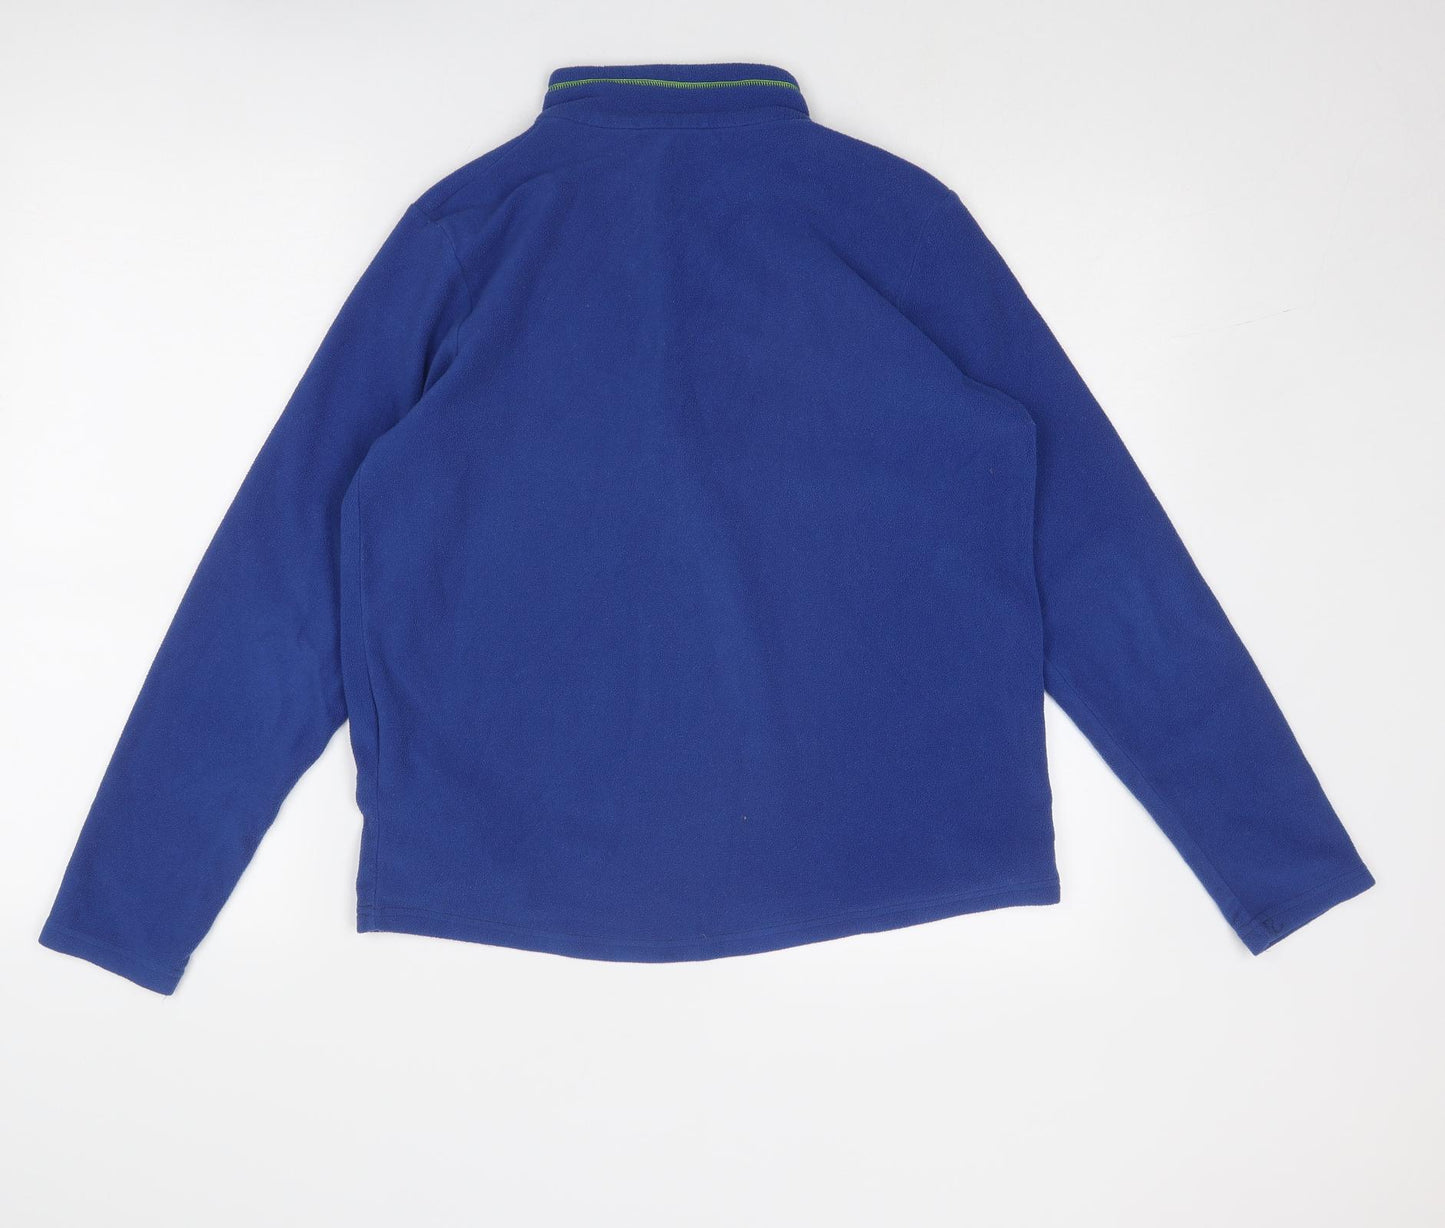 Quechua Boys Blue Polyester Pullover Sweatshirt Size 14-15 Years Zip